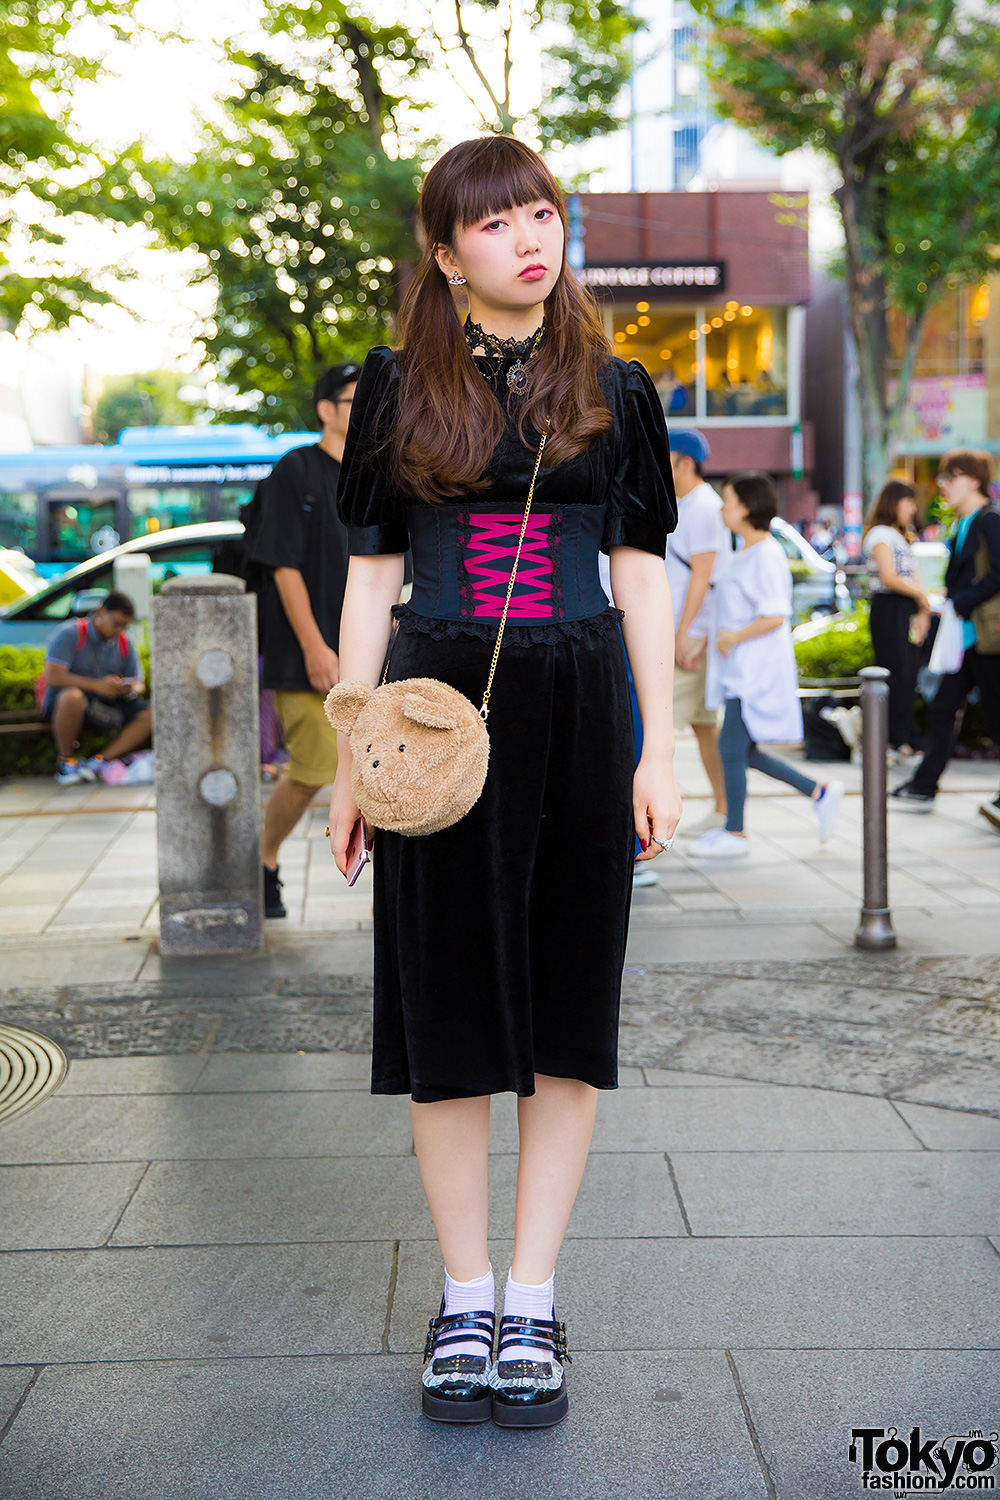 Twin-Tailed Harajuku Girl in Vintage Velvet Dress & Corset w/ Merry Jenny & Vivienne Westwood